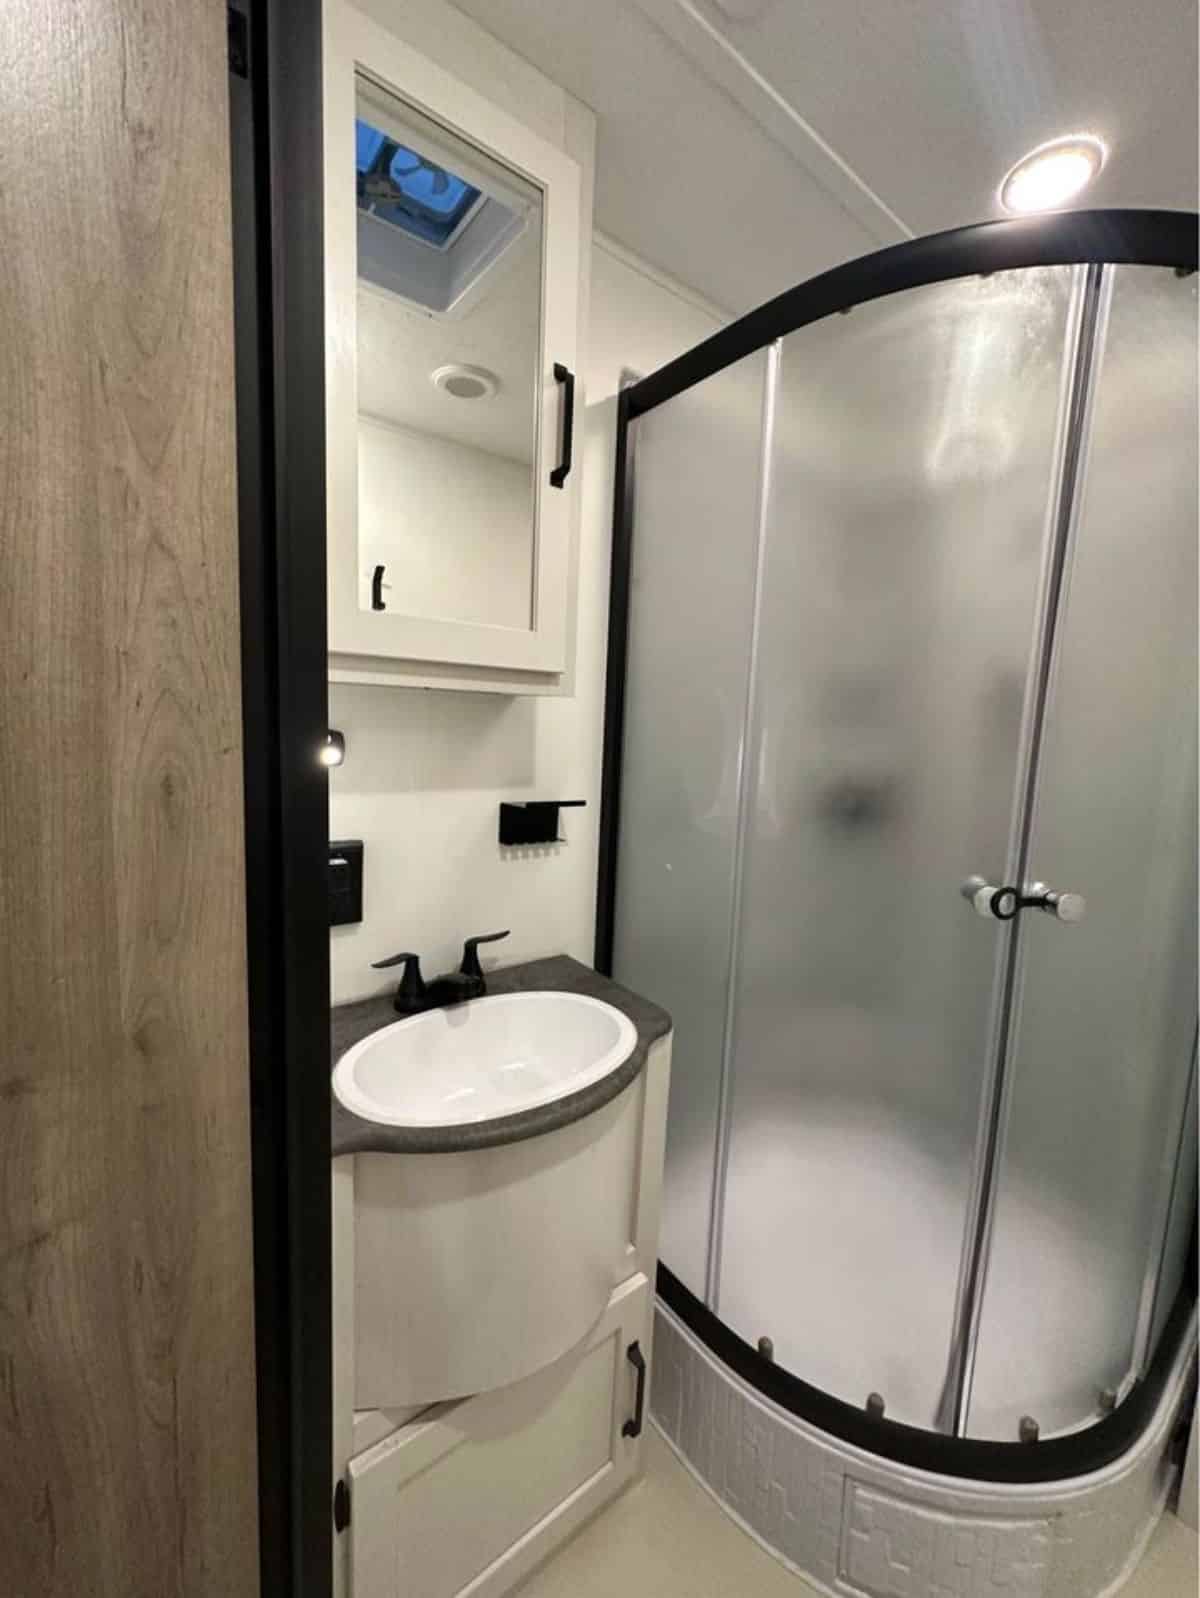 bathroom of upgraded tiny home has all the standard fittings and separate shower area with glass enclosure